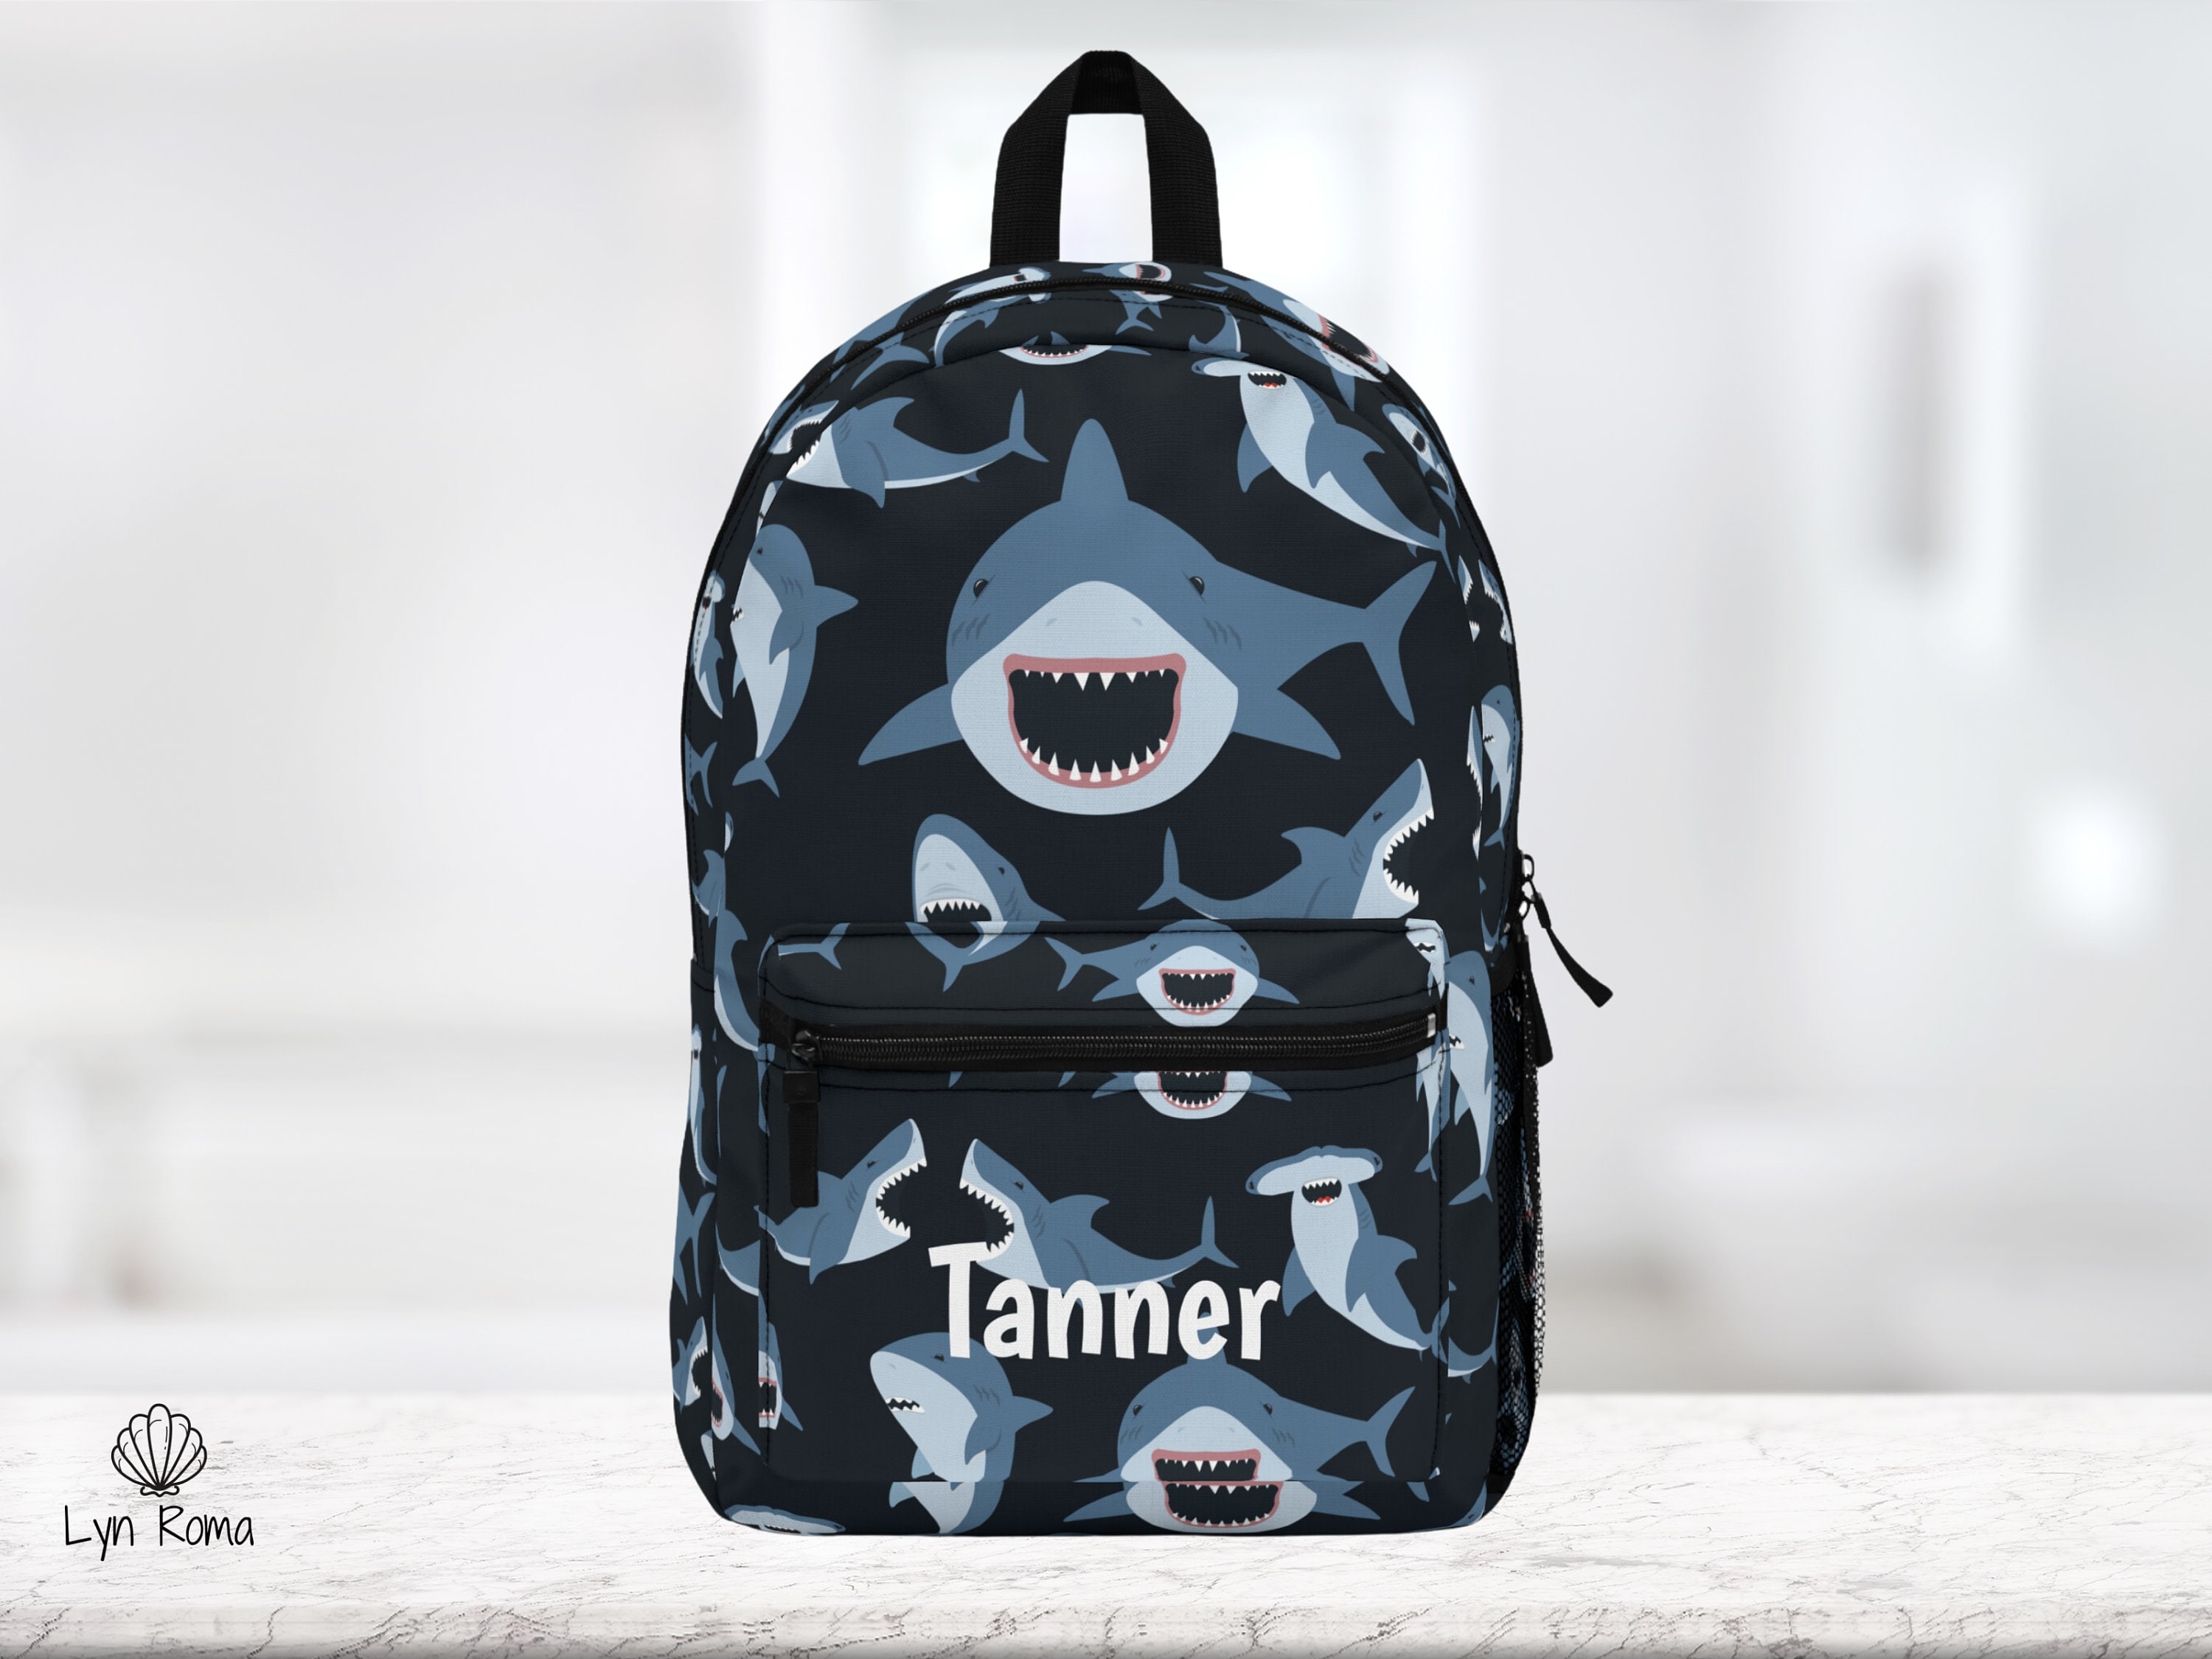 SNOOGG Eco Friendly Canvas Bape Camo Camouflage 2751 Backpack Rucksack  School Travel Unisex Casual Canvas Bag Bookbag Satchel 5 L Laptop Backpack  Blue - Price in India